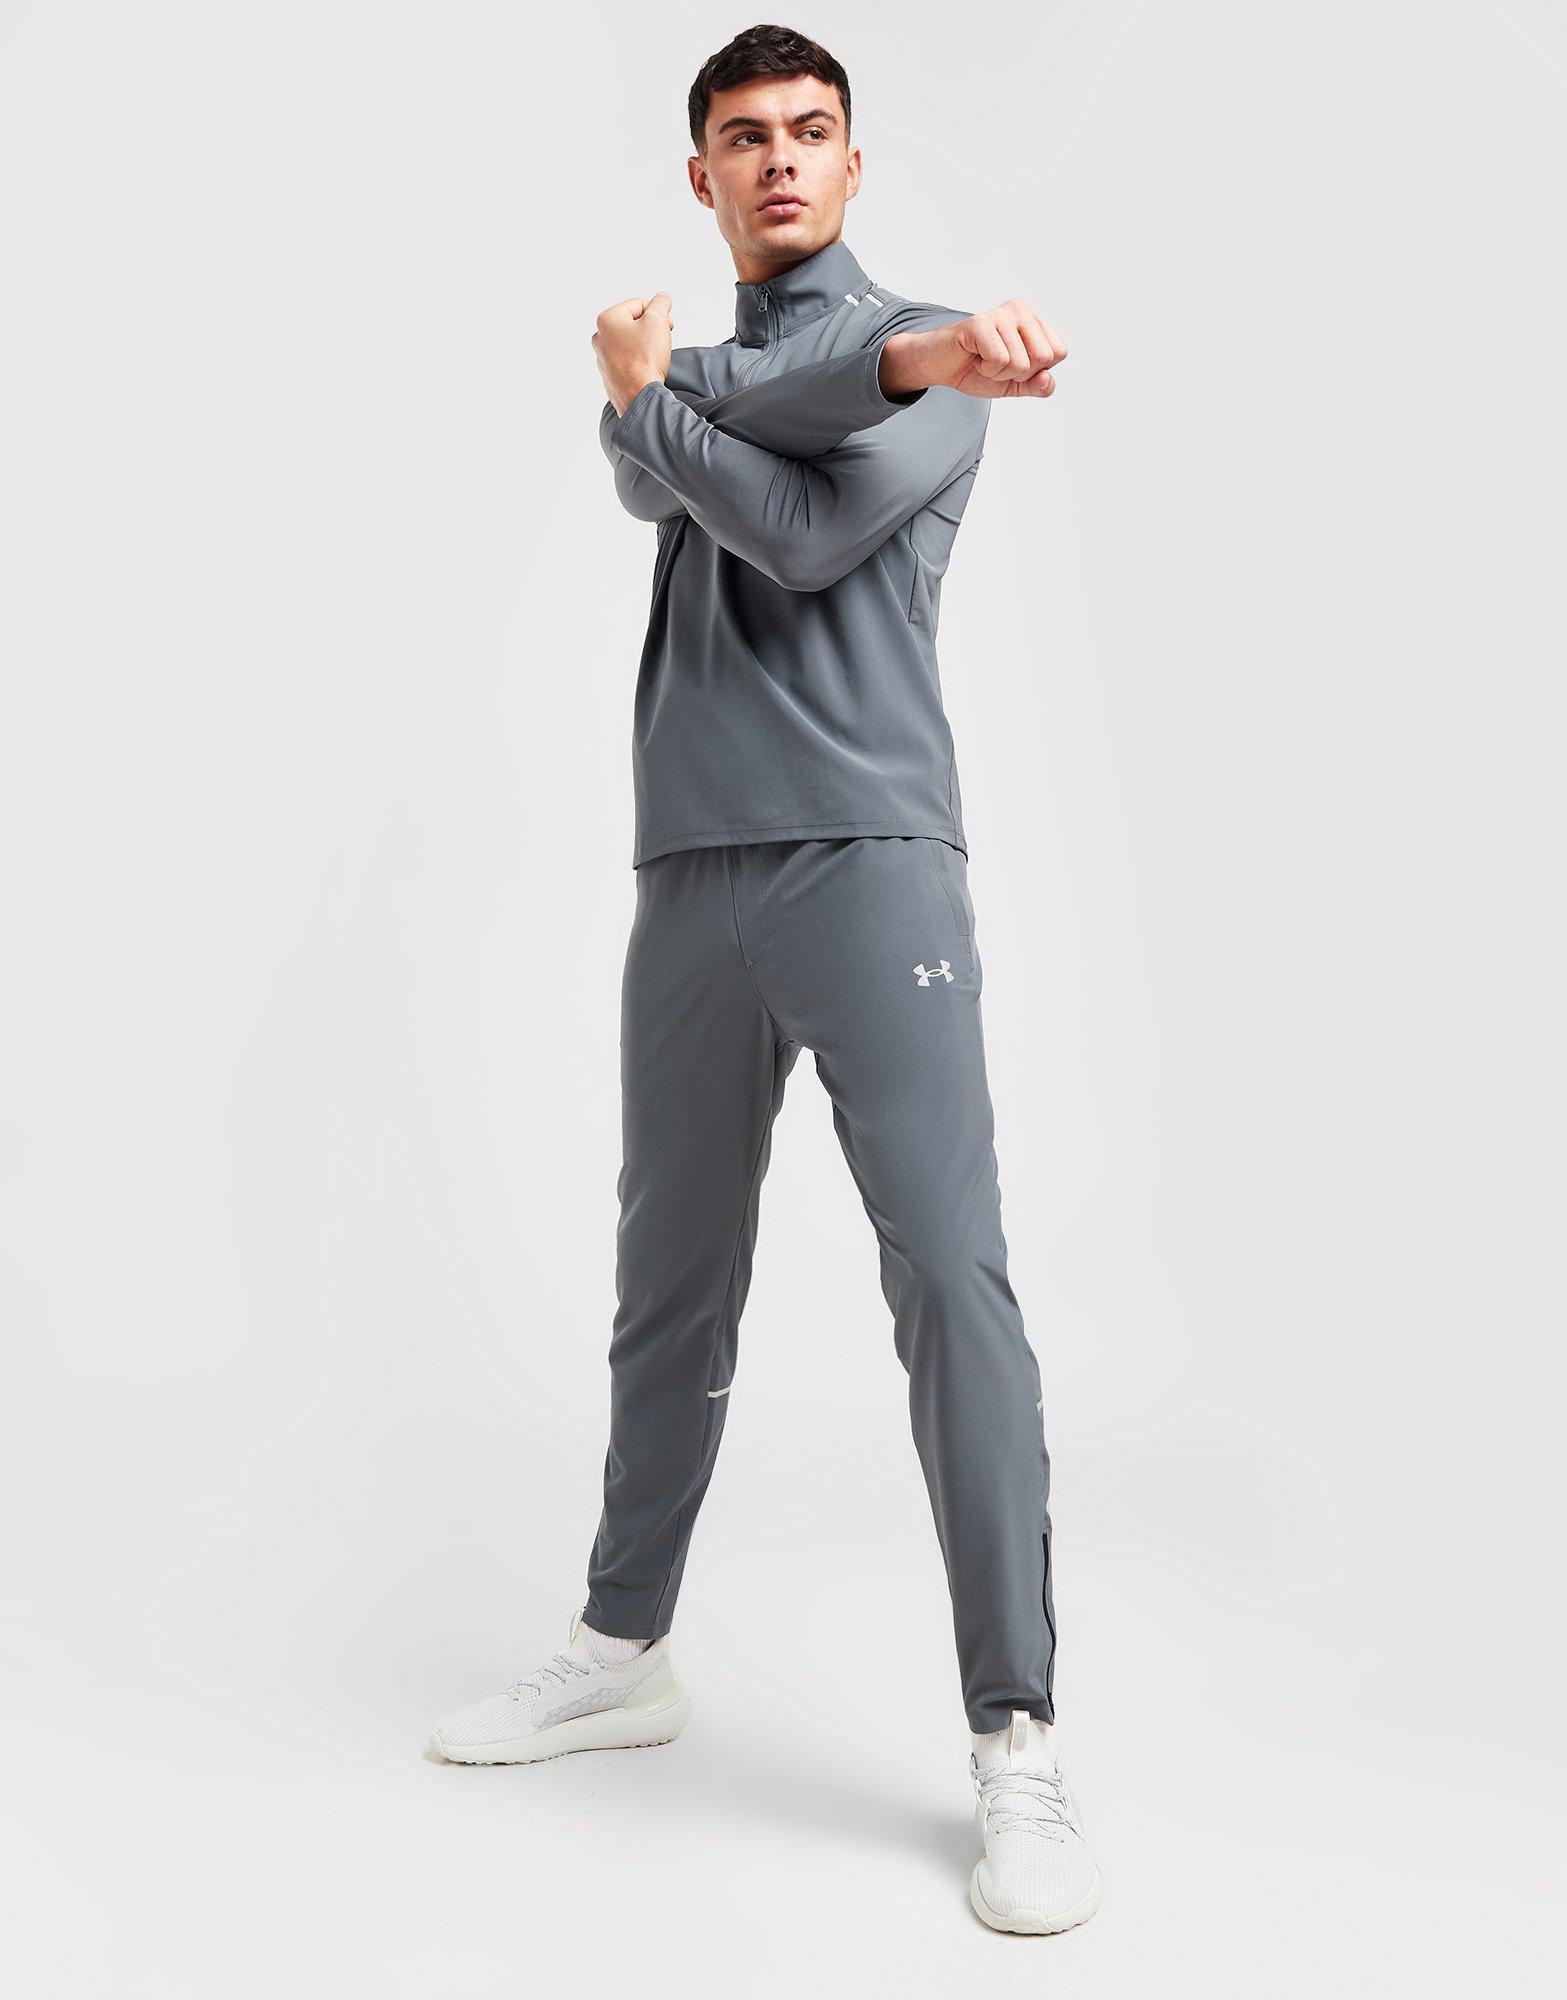 Iron Hyde Aygir Men's Sports Track Pants (Light Grey) exclusive at